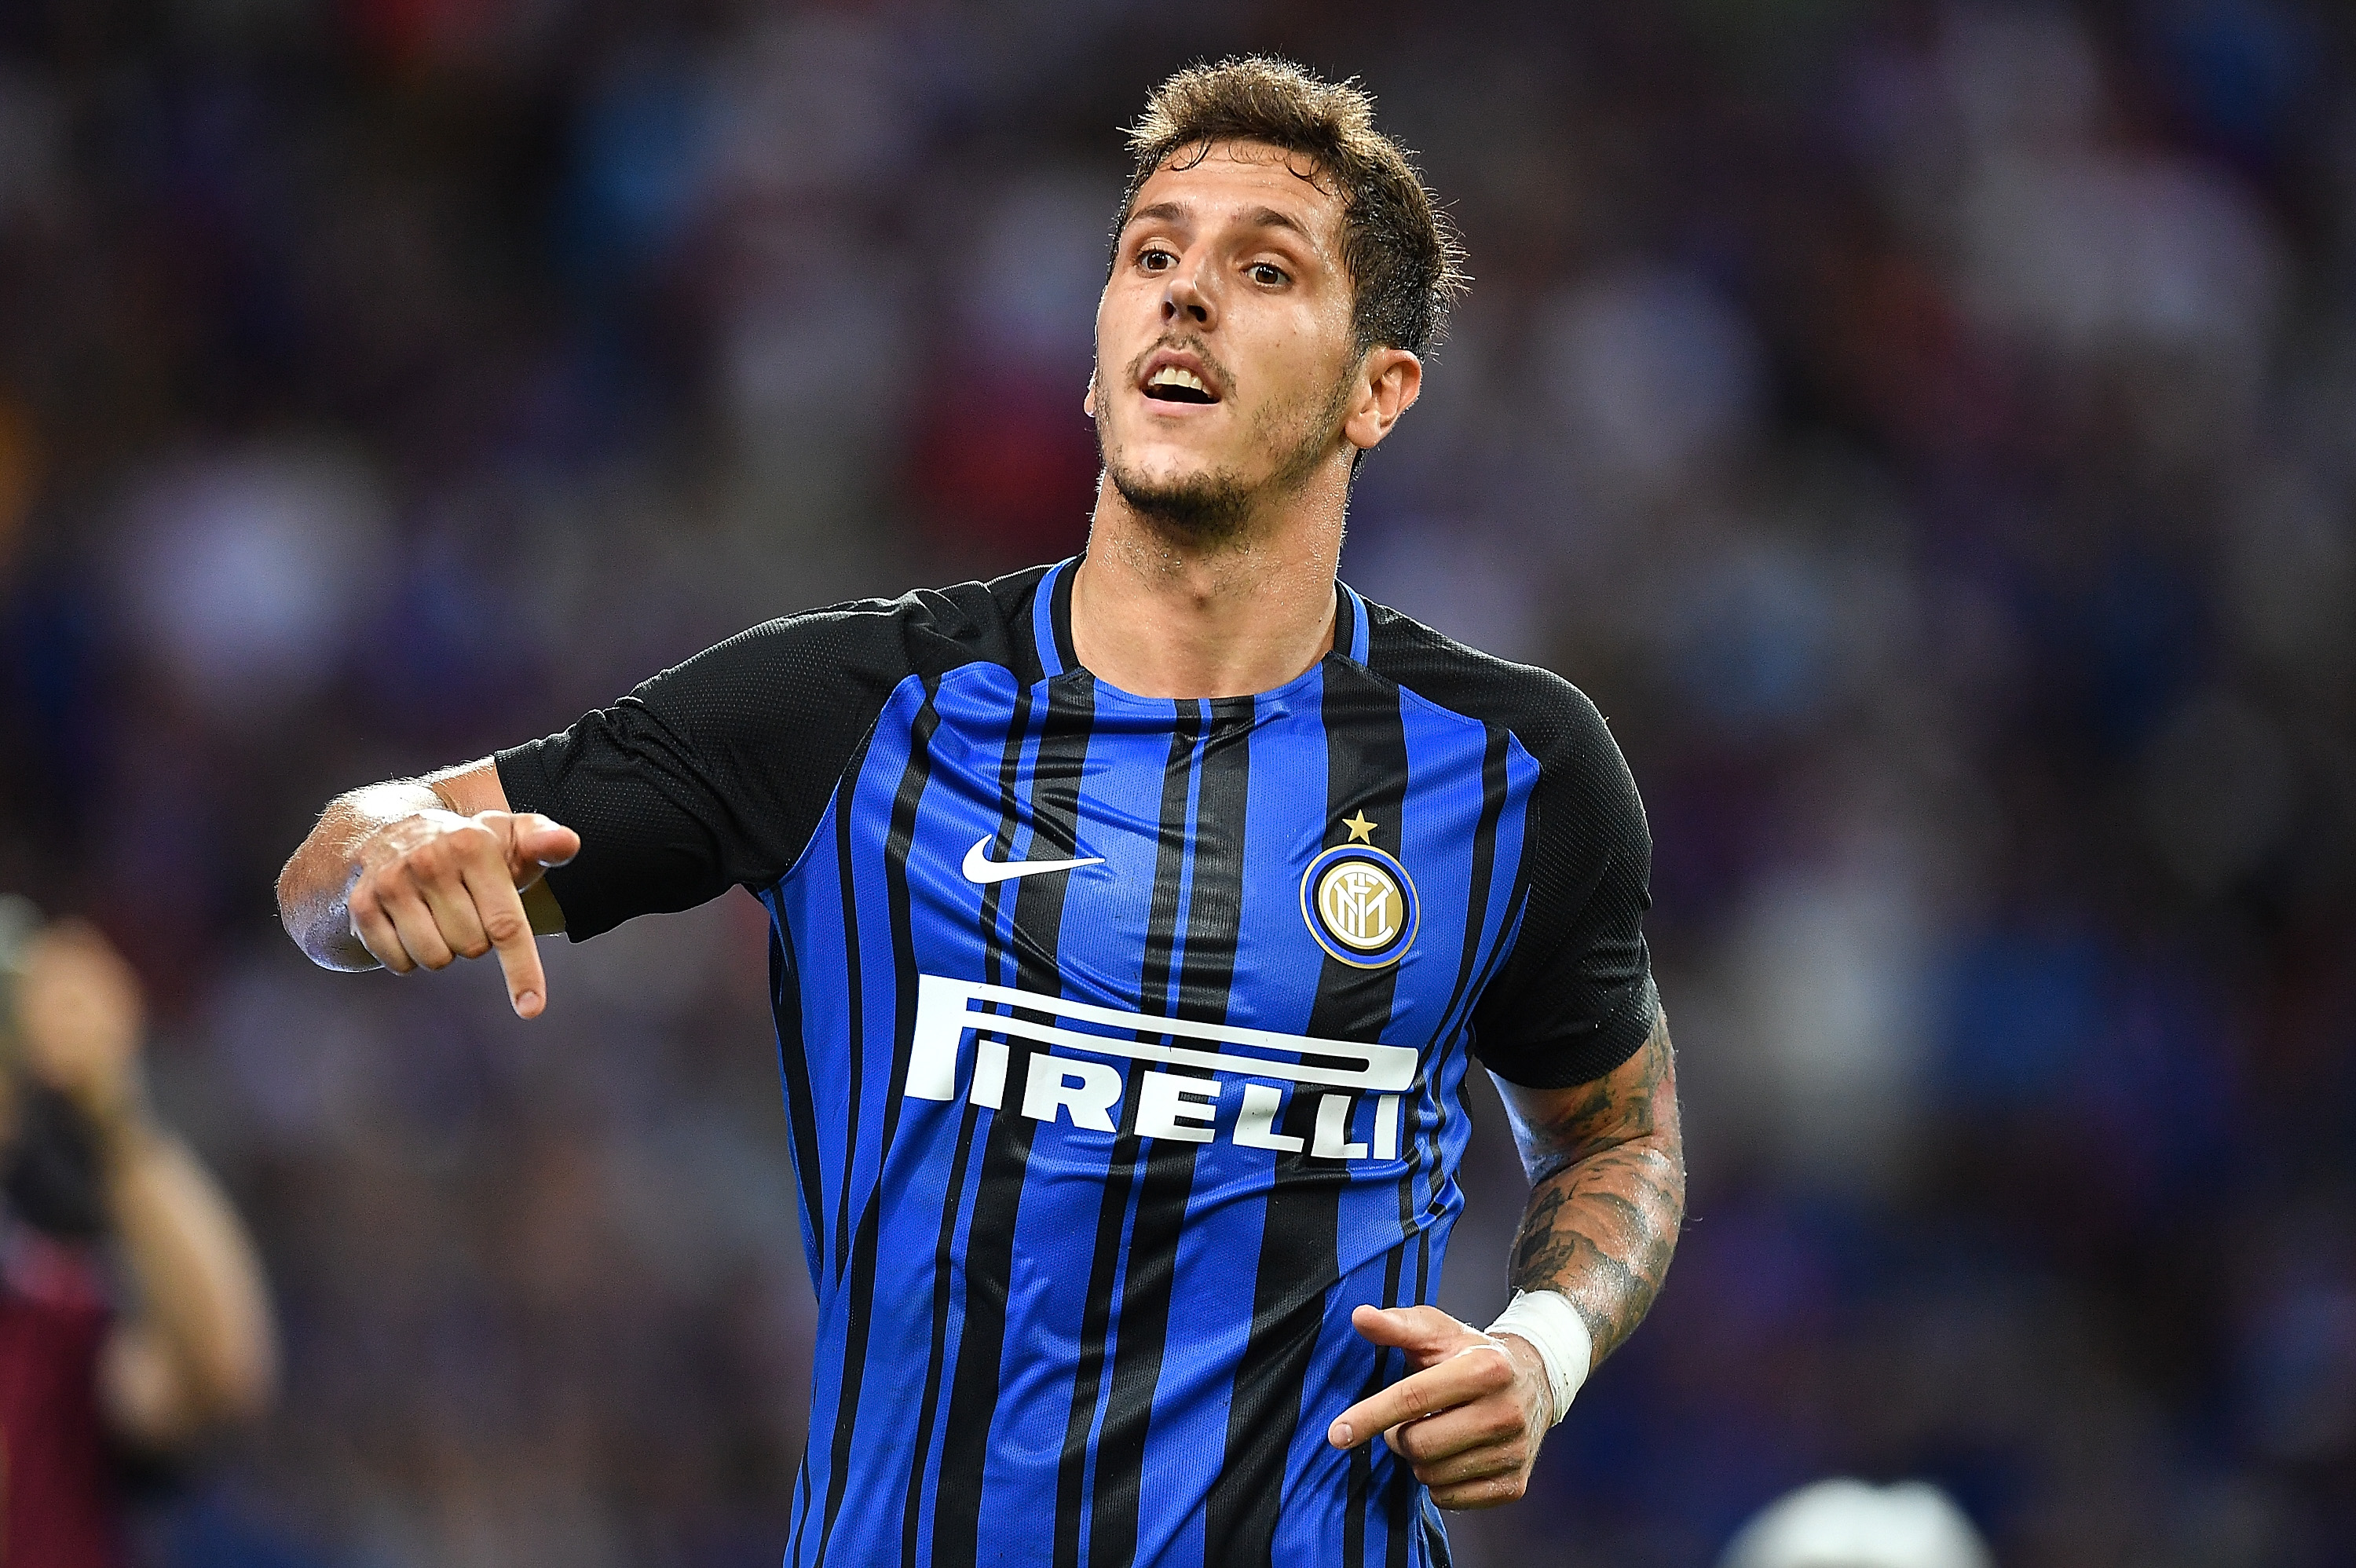 Monaco Attacker Stevan Jovetic: “Happy With What I Did At Inter”